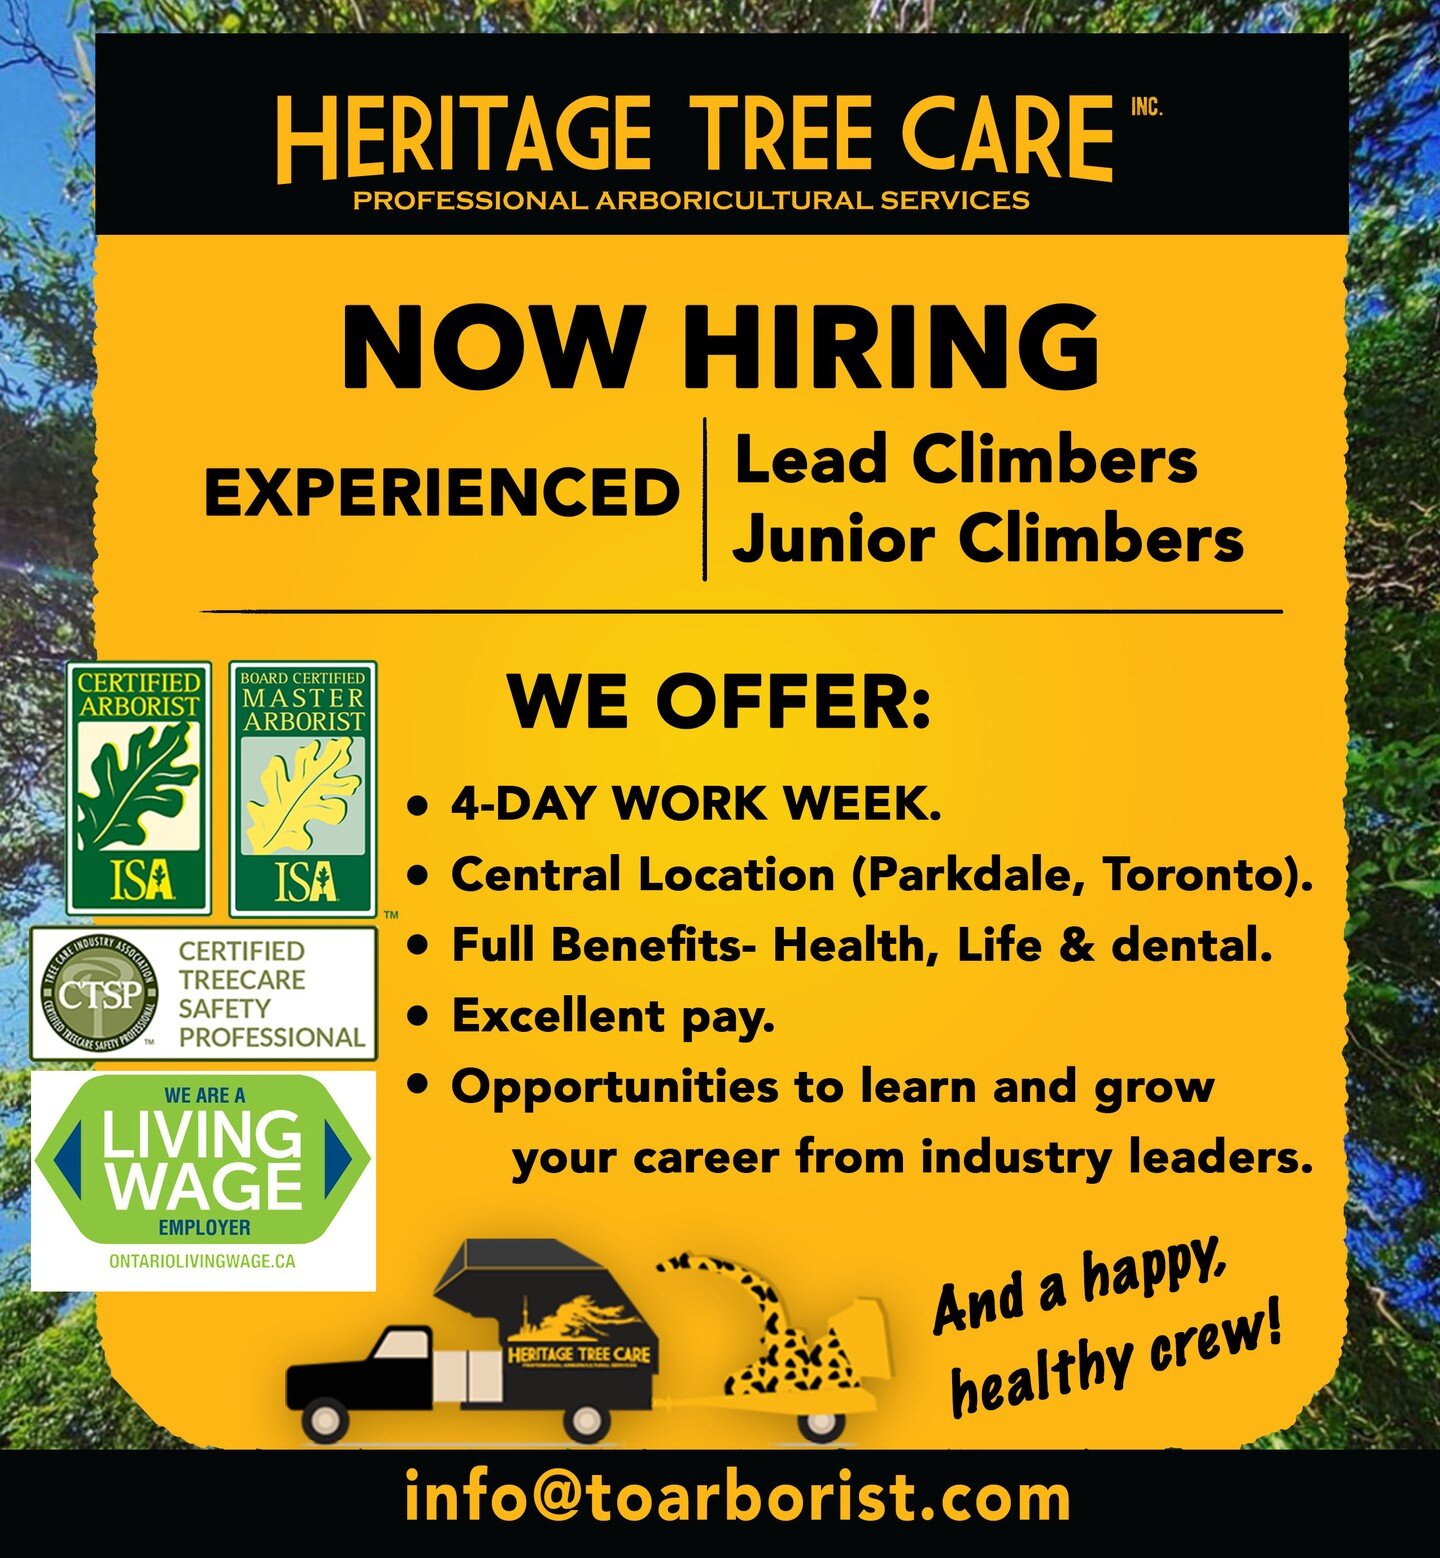 We&rsquo;re #hiring! Heritage Tree Care Inc. Is looking for Junior and Lead Climbers for the 2023 season. 

Enjoy four-day work weeks! Full benefits + excellent pay. Work outside in #nature with industry leaders, from our yard based in Toronto&rsquo;